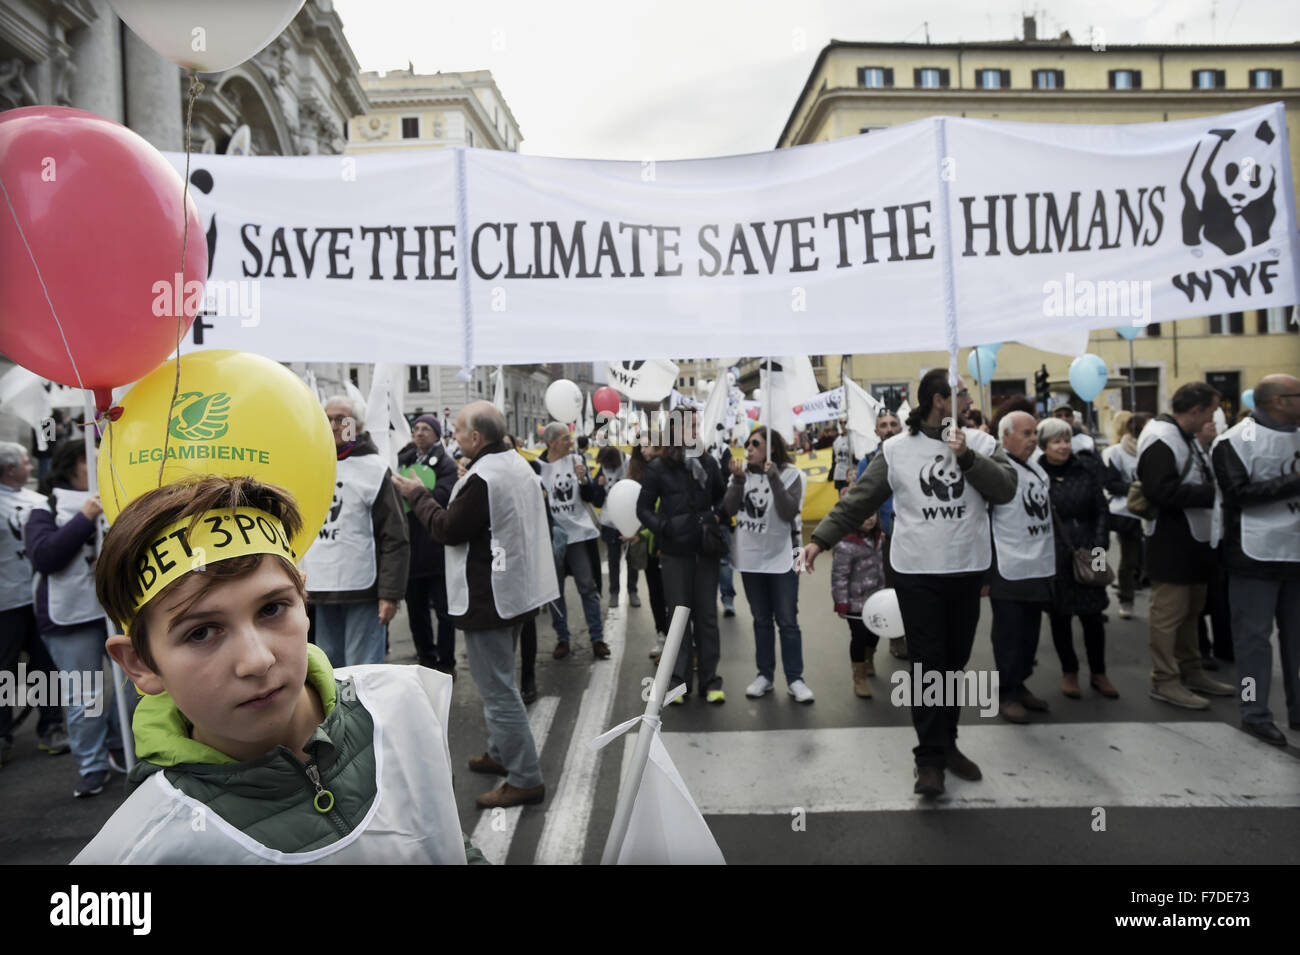 Nov. 29, 2015 - Europe, Italy, Rome, november 29, 2015 :Demonstrators march during a rally calling for action on climate change on November 29, 2015 in Rome a day before the launch of the COP21 conference in Paris. Some 150 leaders including US President Barack Obama, China's Xi Jinping, India's Narendra Modi and Russia's Vladimir Putin will attend the start of the UN conference Monday, tasked with reaching the first truly universal climate pact. The goal is to limit average global warming to two degrees Celsius (3.6 degrees Fahrenheit), perhaps less, over pre-Industrial Revolution levels by c Stock Photo